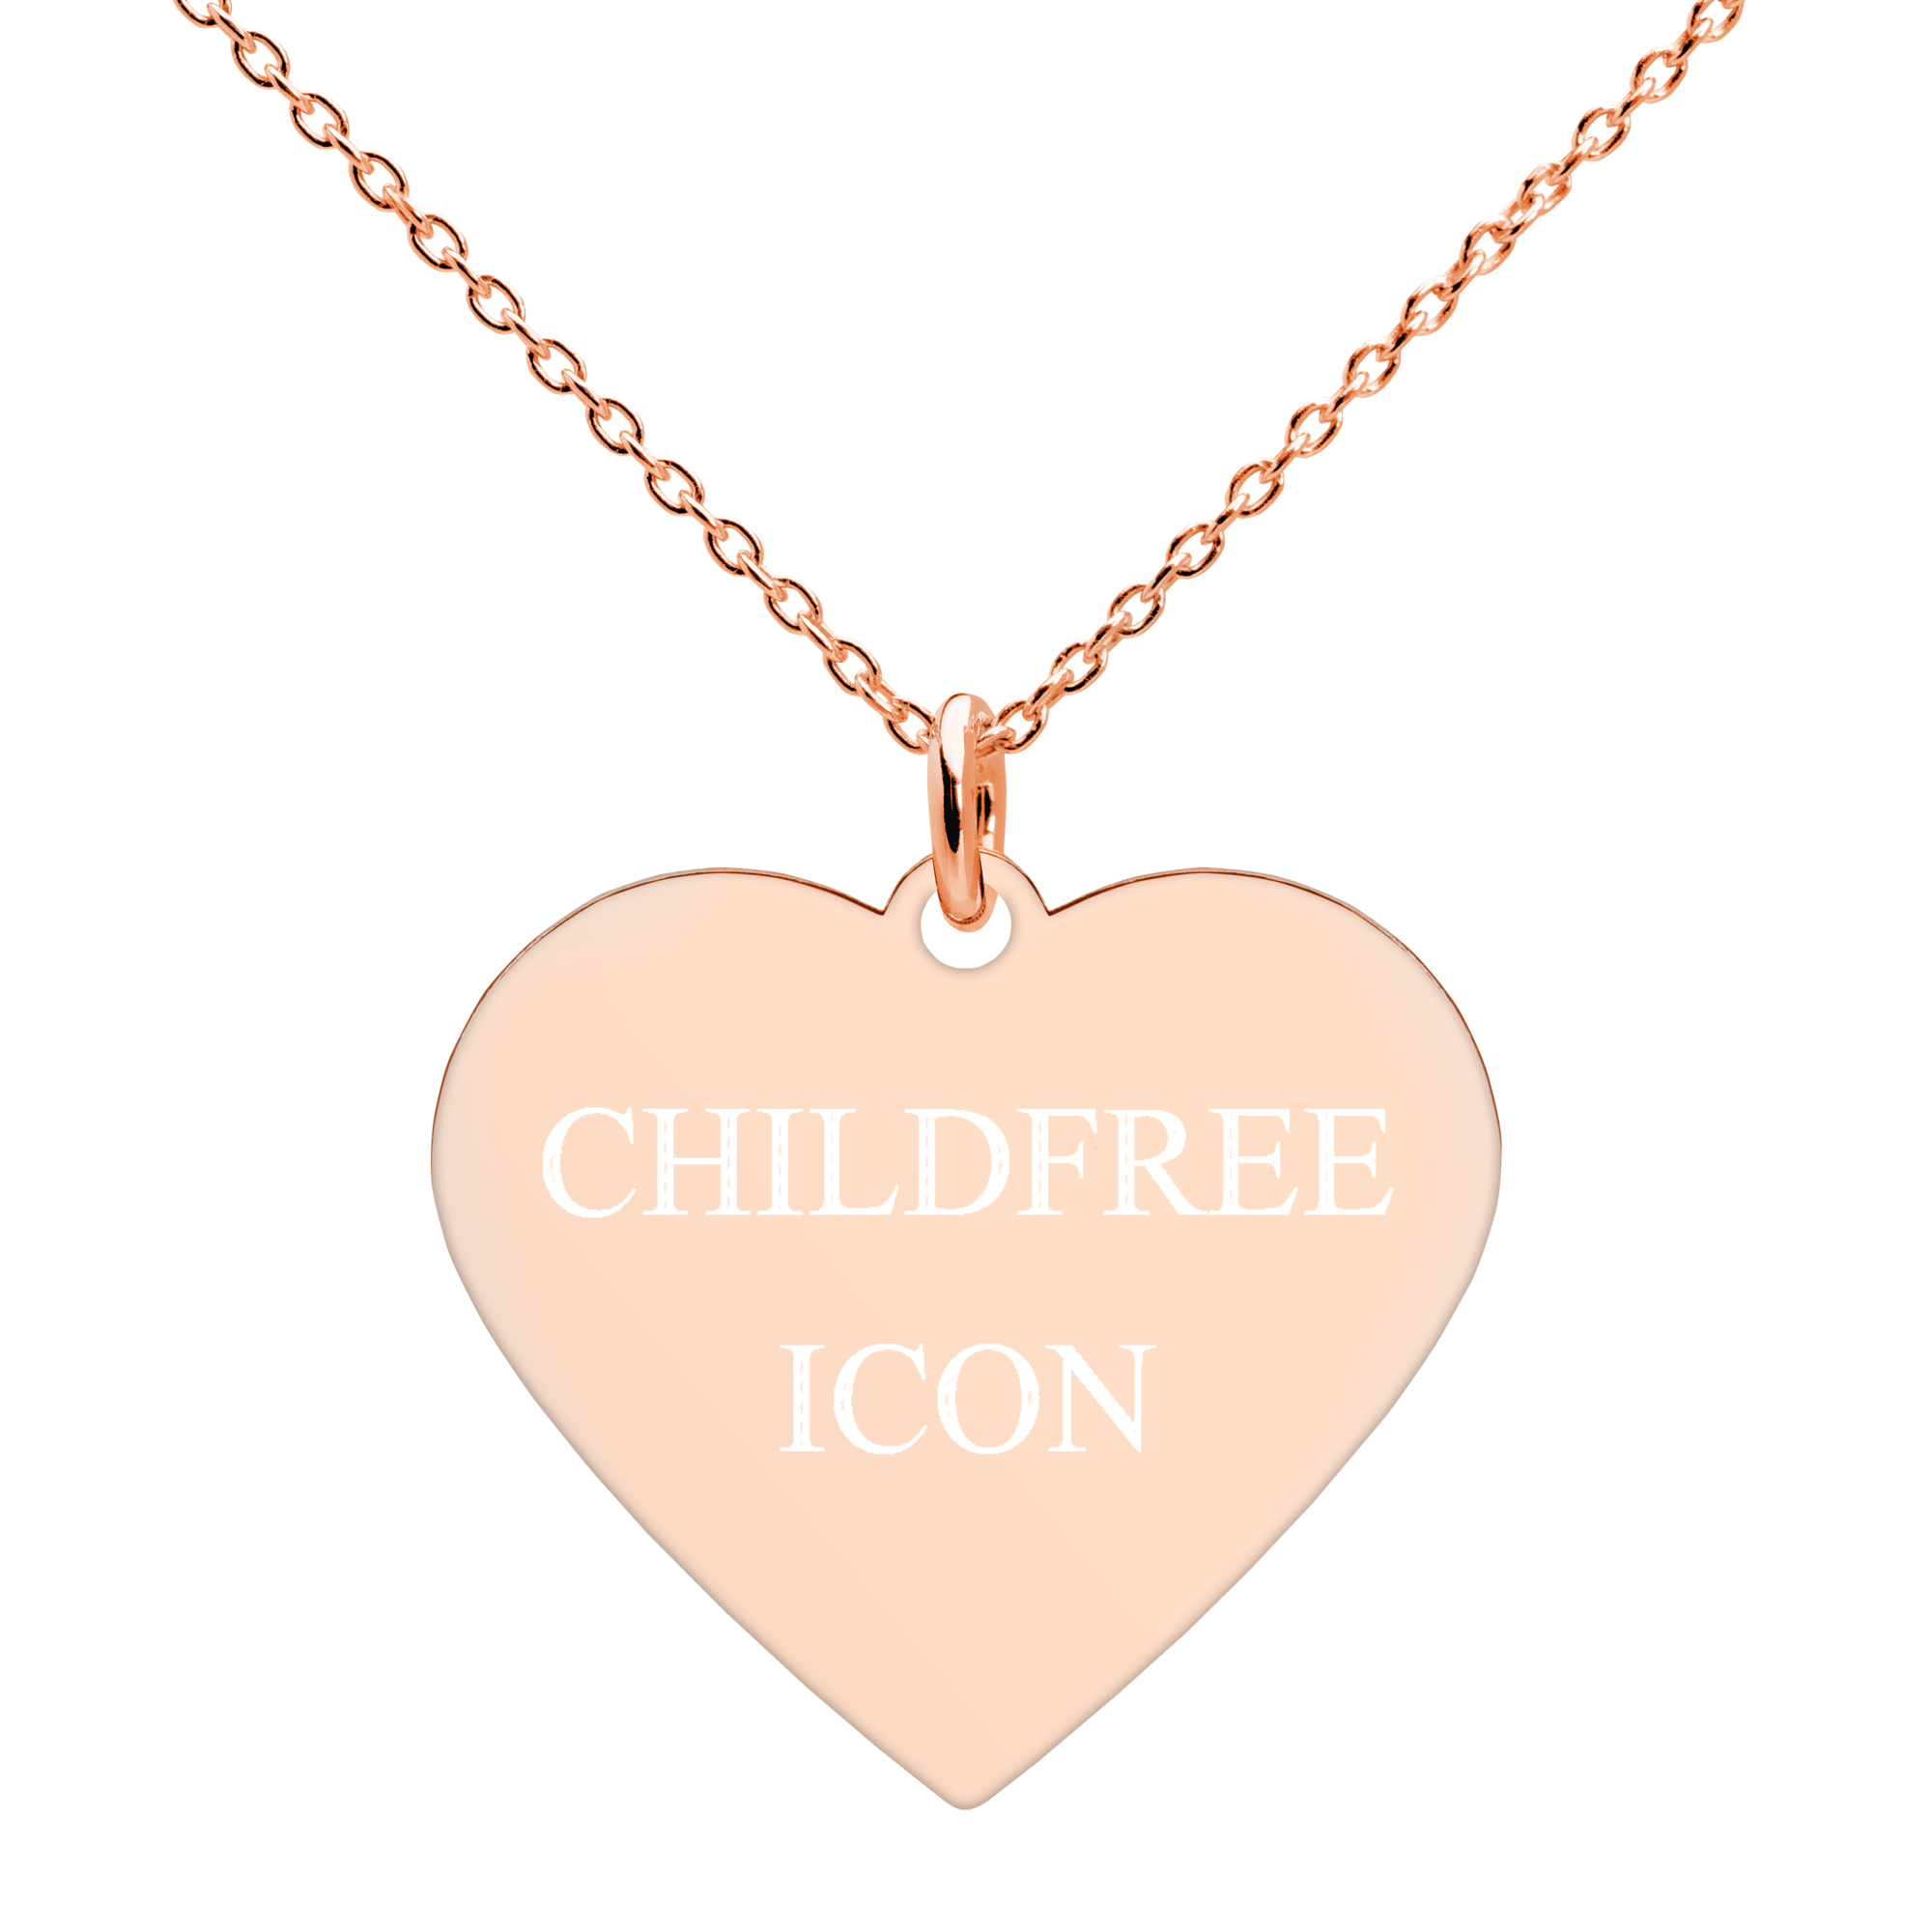 Childfree Icon Member Exclusive engraved heart necklace 18k rose gold